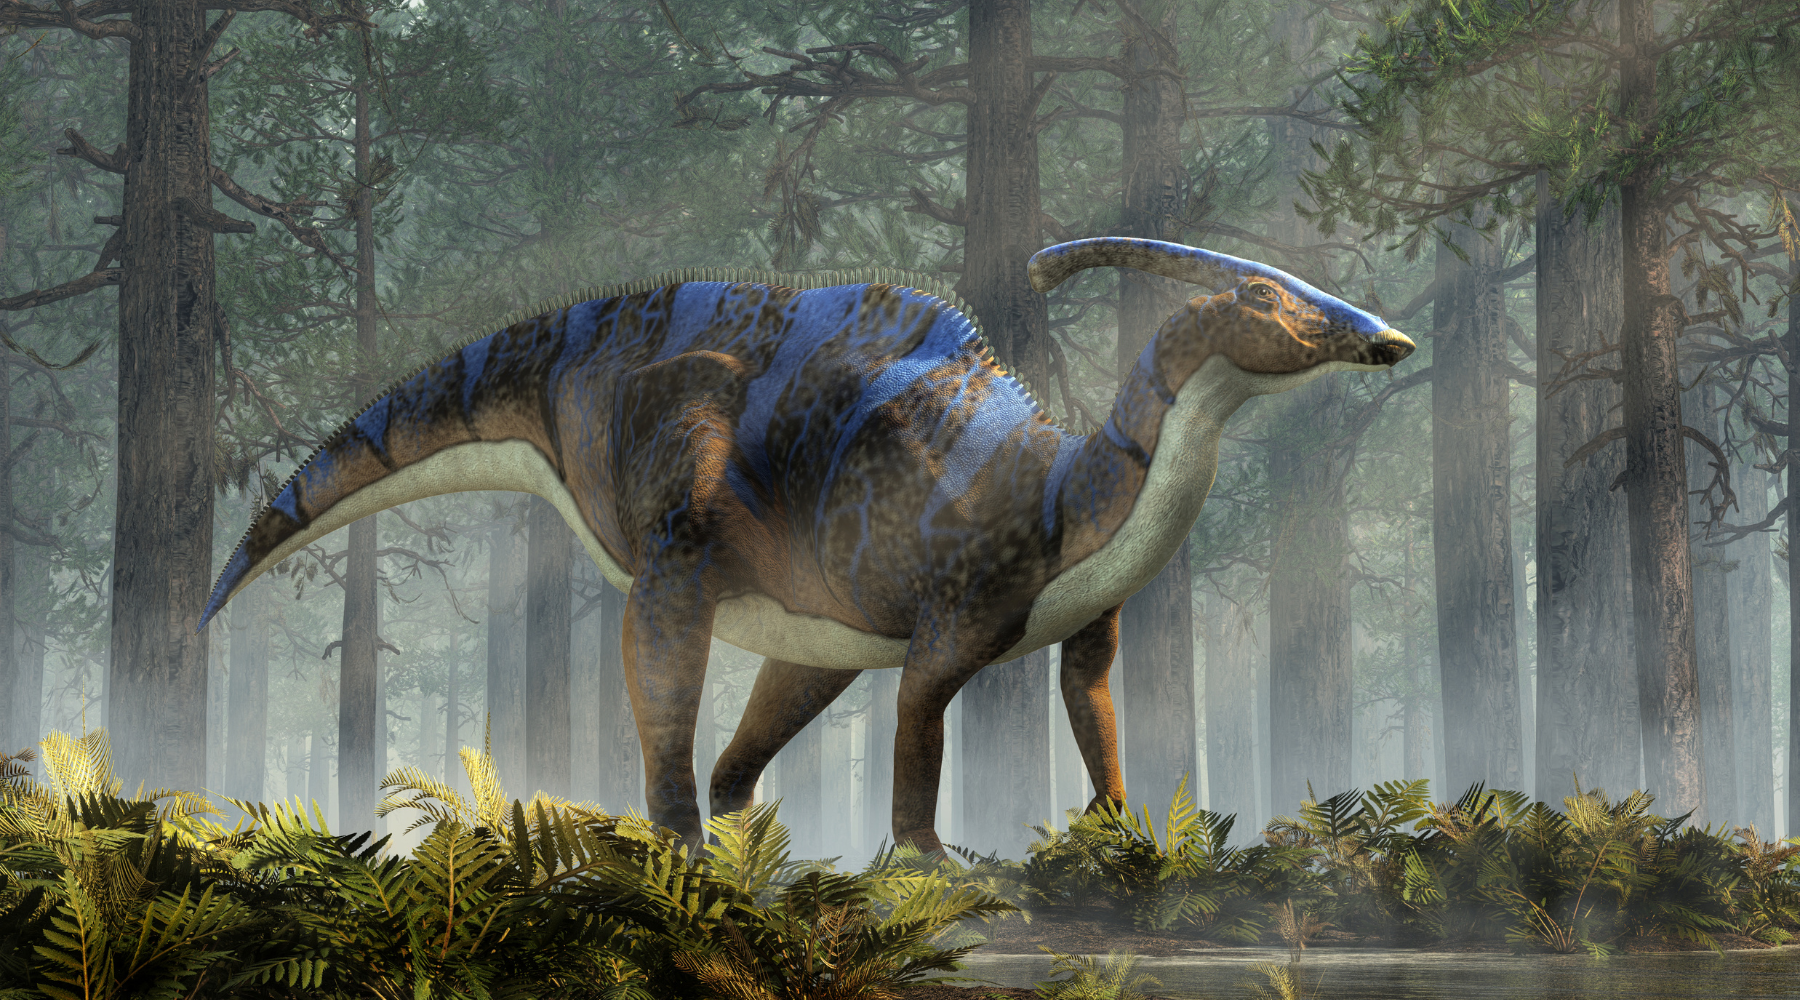 Parasaurolophus: Unlocking the Mystery Behind One of the Coolest Dinosaurs of All Time